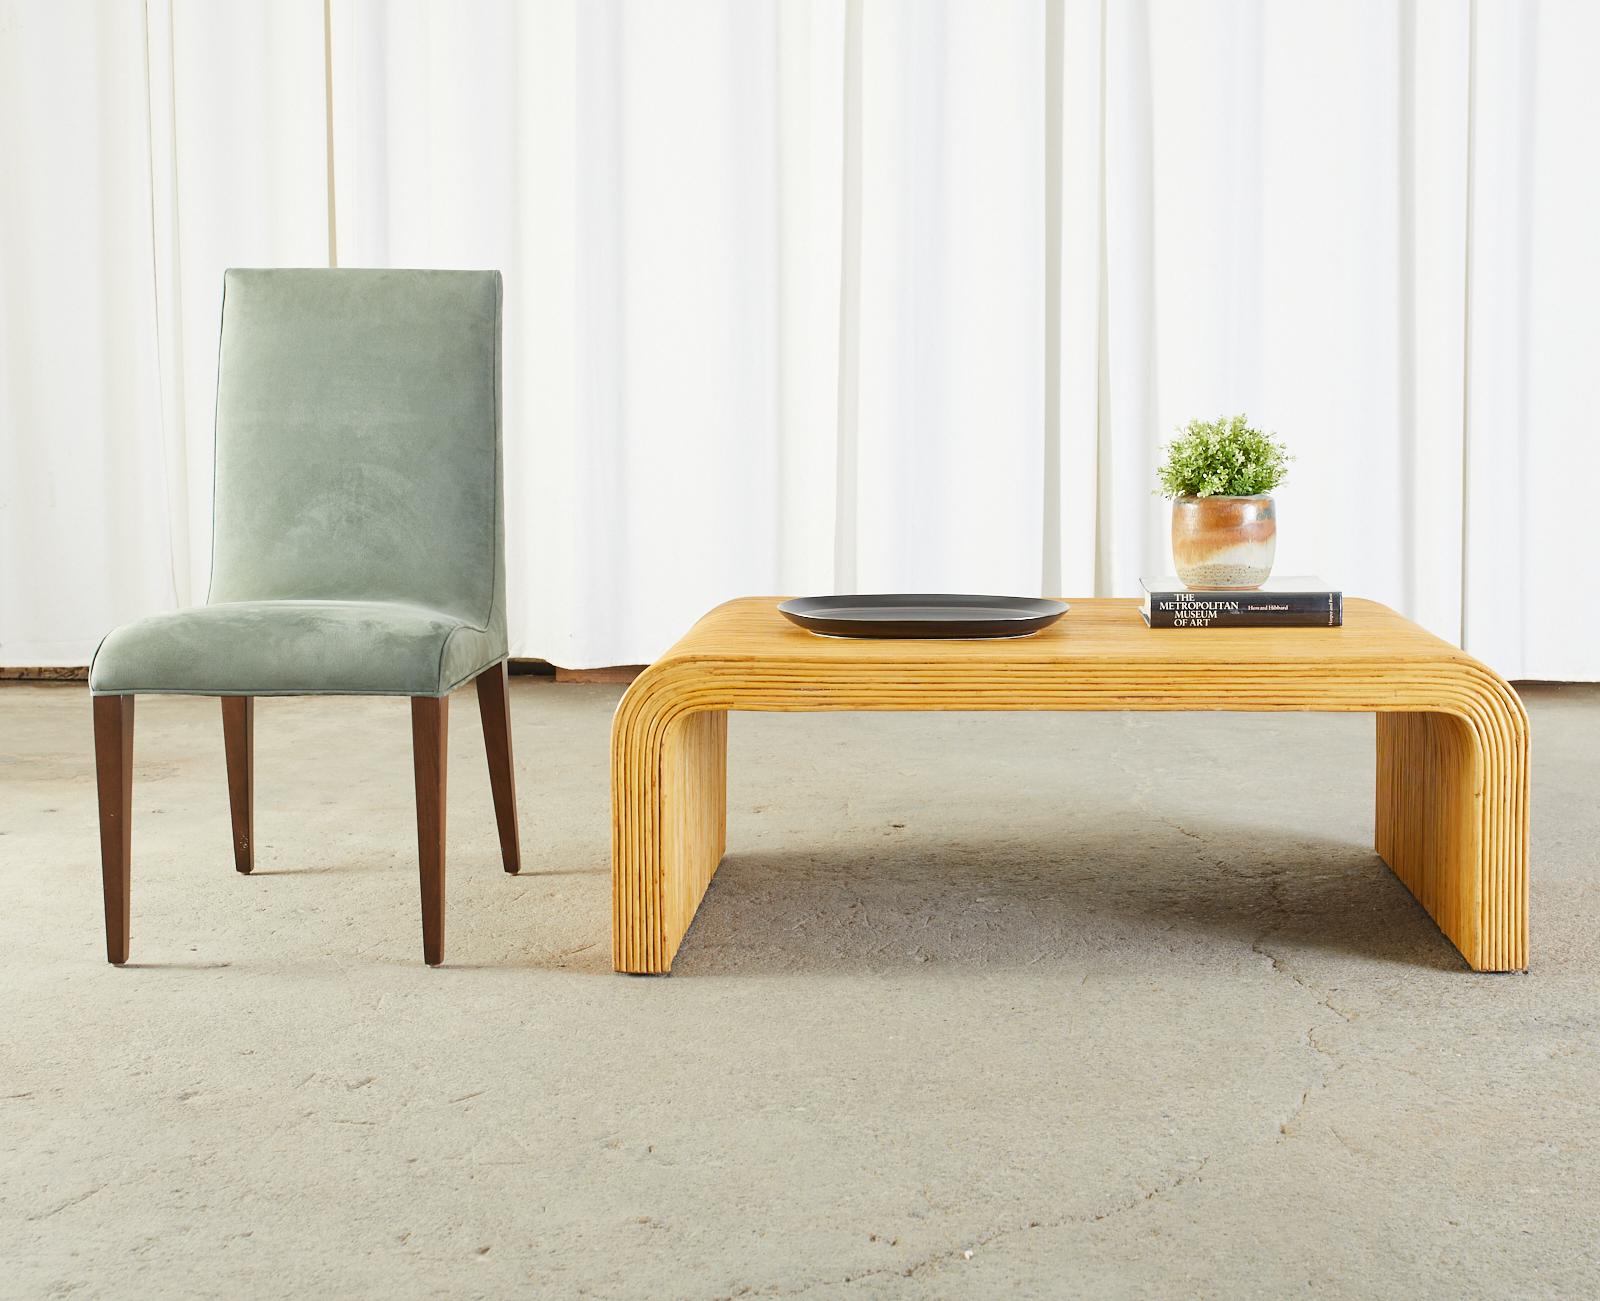 Mid-Century Modern waterfall coffee cocktail table featuring a pencil reed rattan finish. The table is unmarked however it is made in the organic modern style of Karl Springer and Jean-Michel Frank. Finished on all sides and inside the legs the